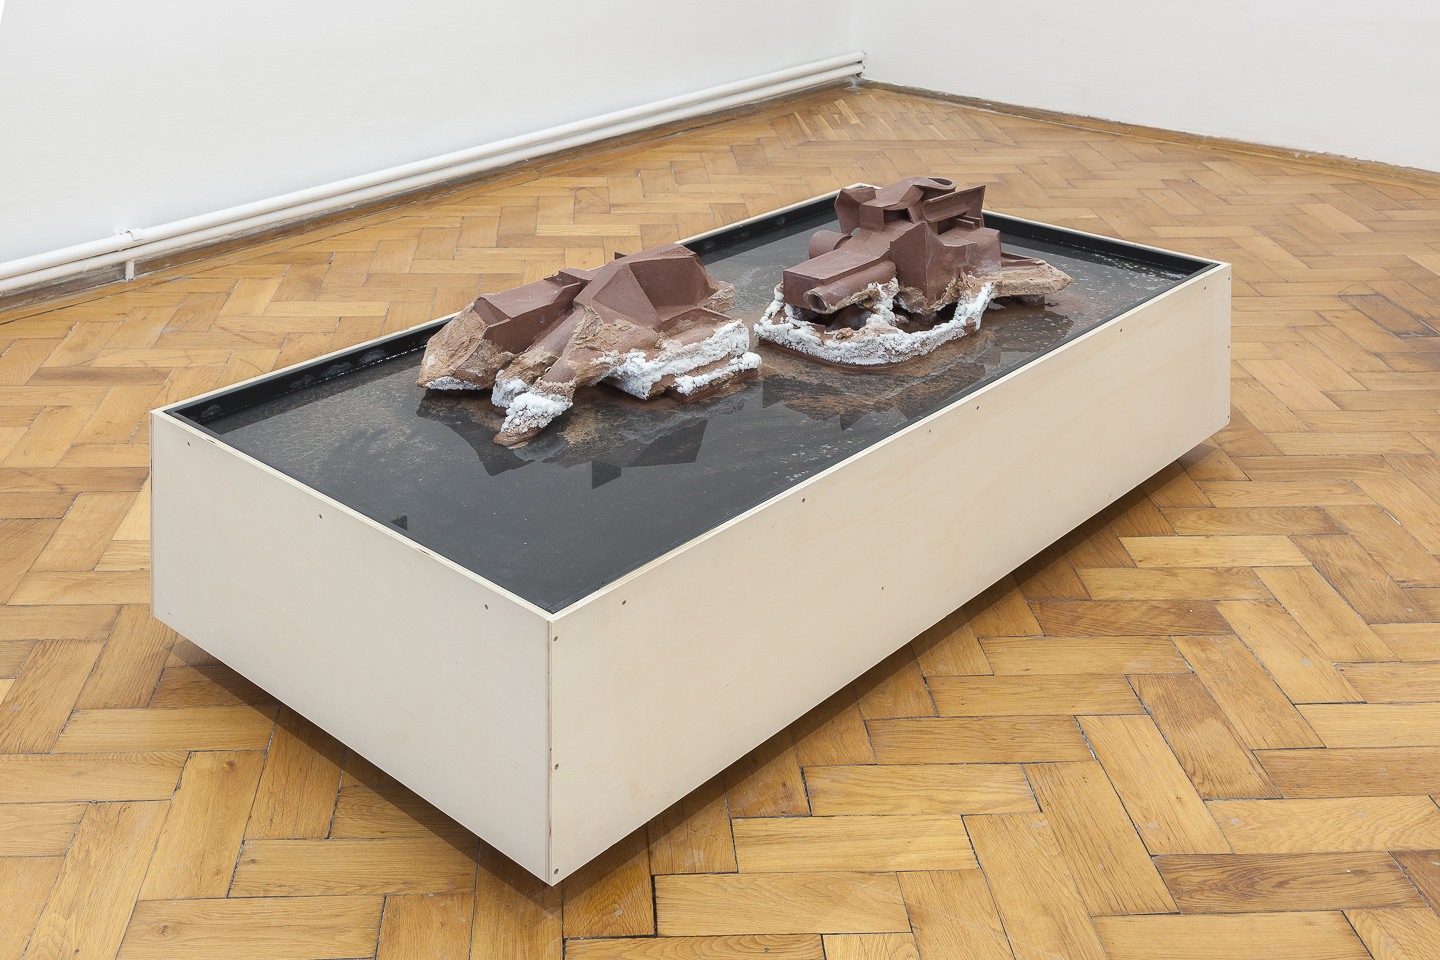 Laurence Sturla*1992 in Swindon, UKlives and works in ViennaBut all they found where tide lines III, 2020, Unglazed stoneware ceramic, raw clay, salt, bone meal, wood, PVC, water, metal fixings, 155 x 75 x 50 cm